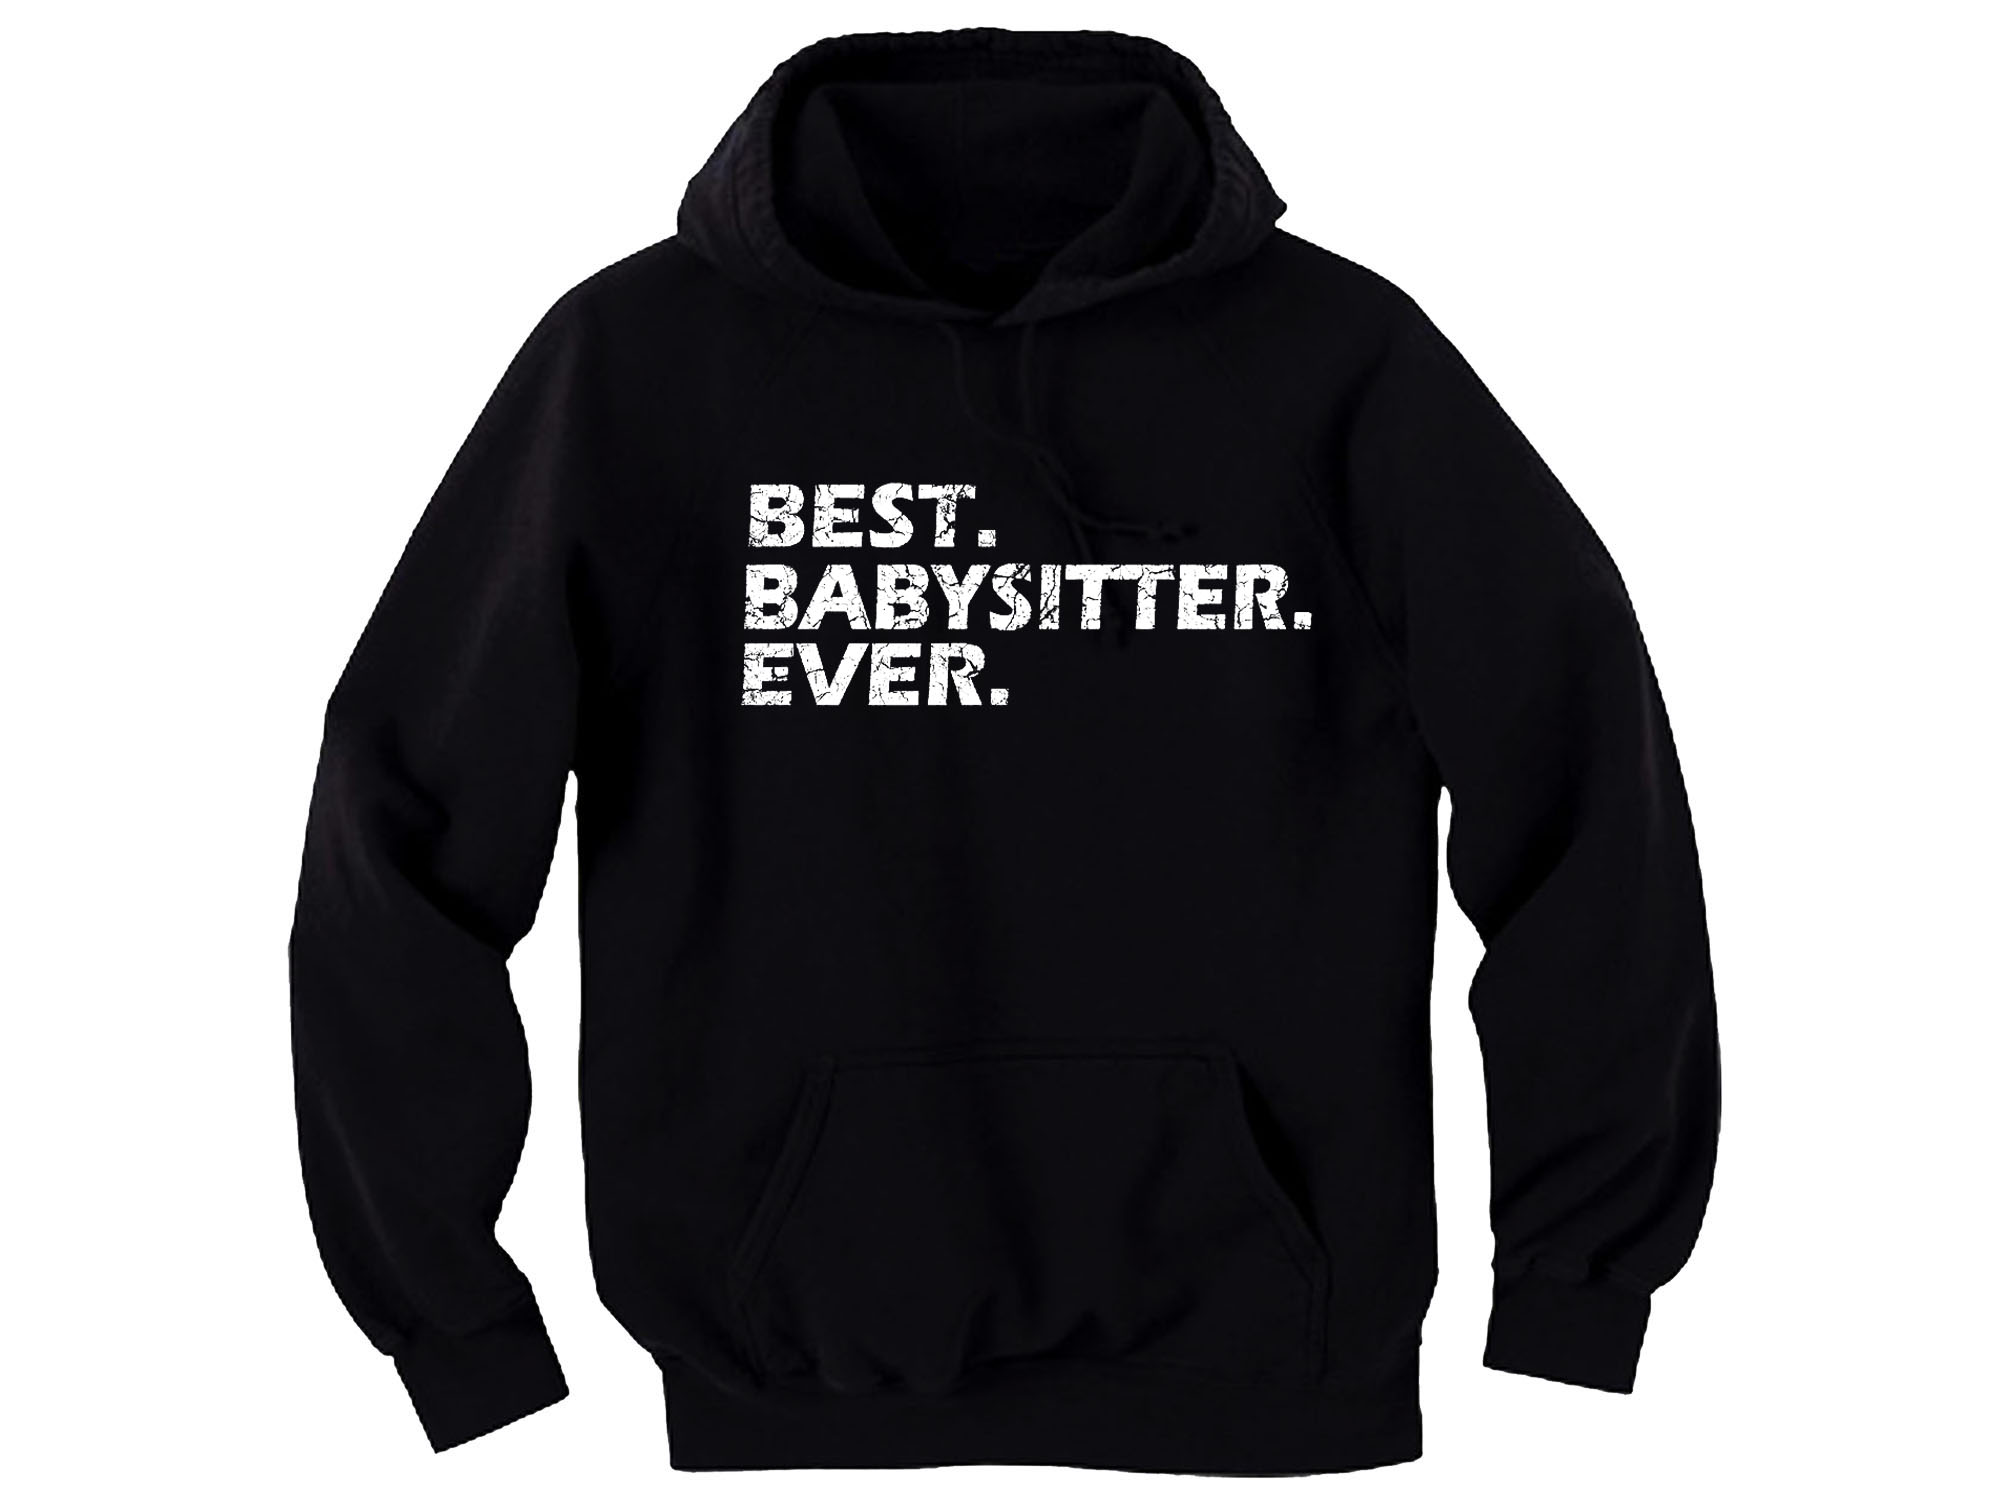 Best babysitter ever distressed print hoodie Great Gift!!!